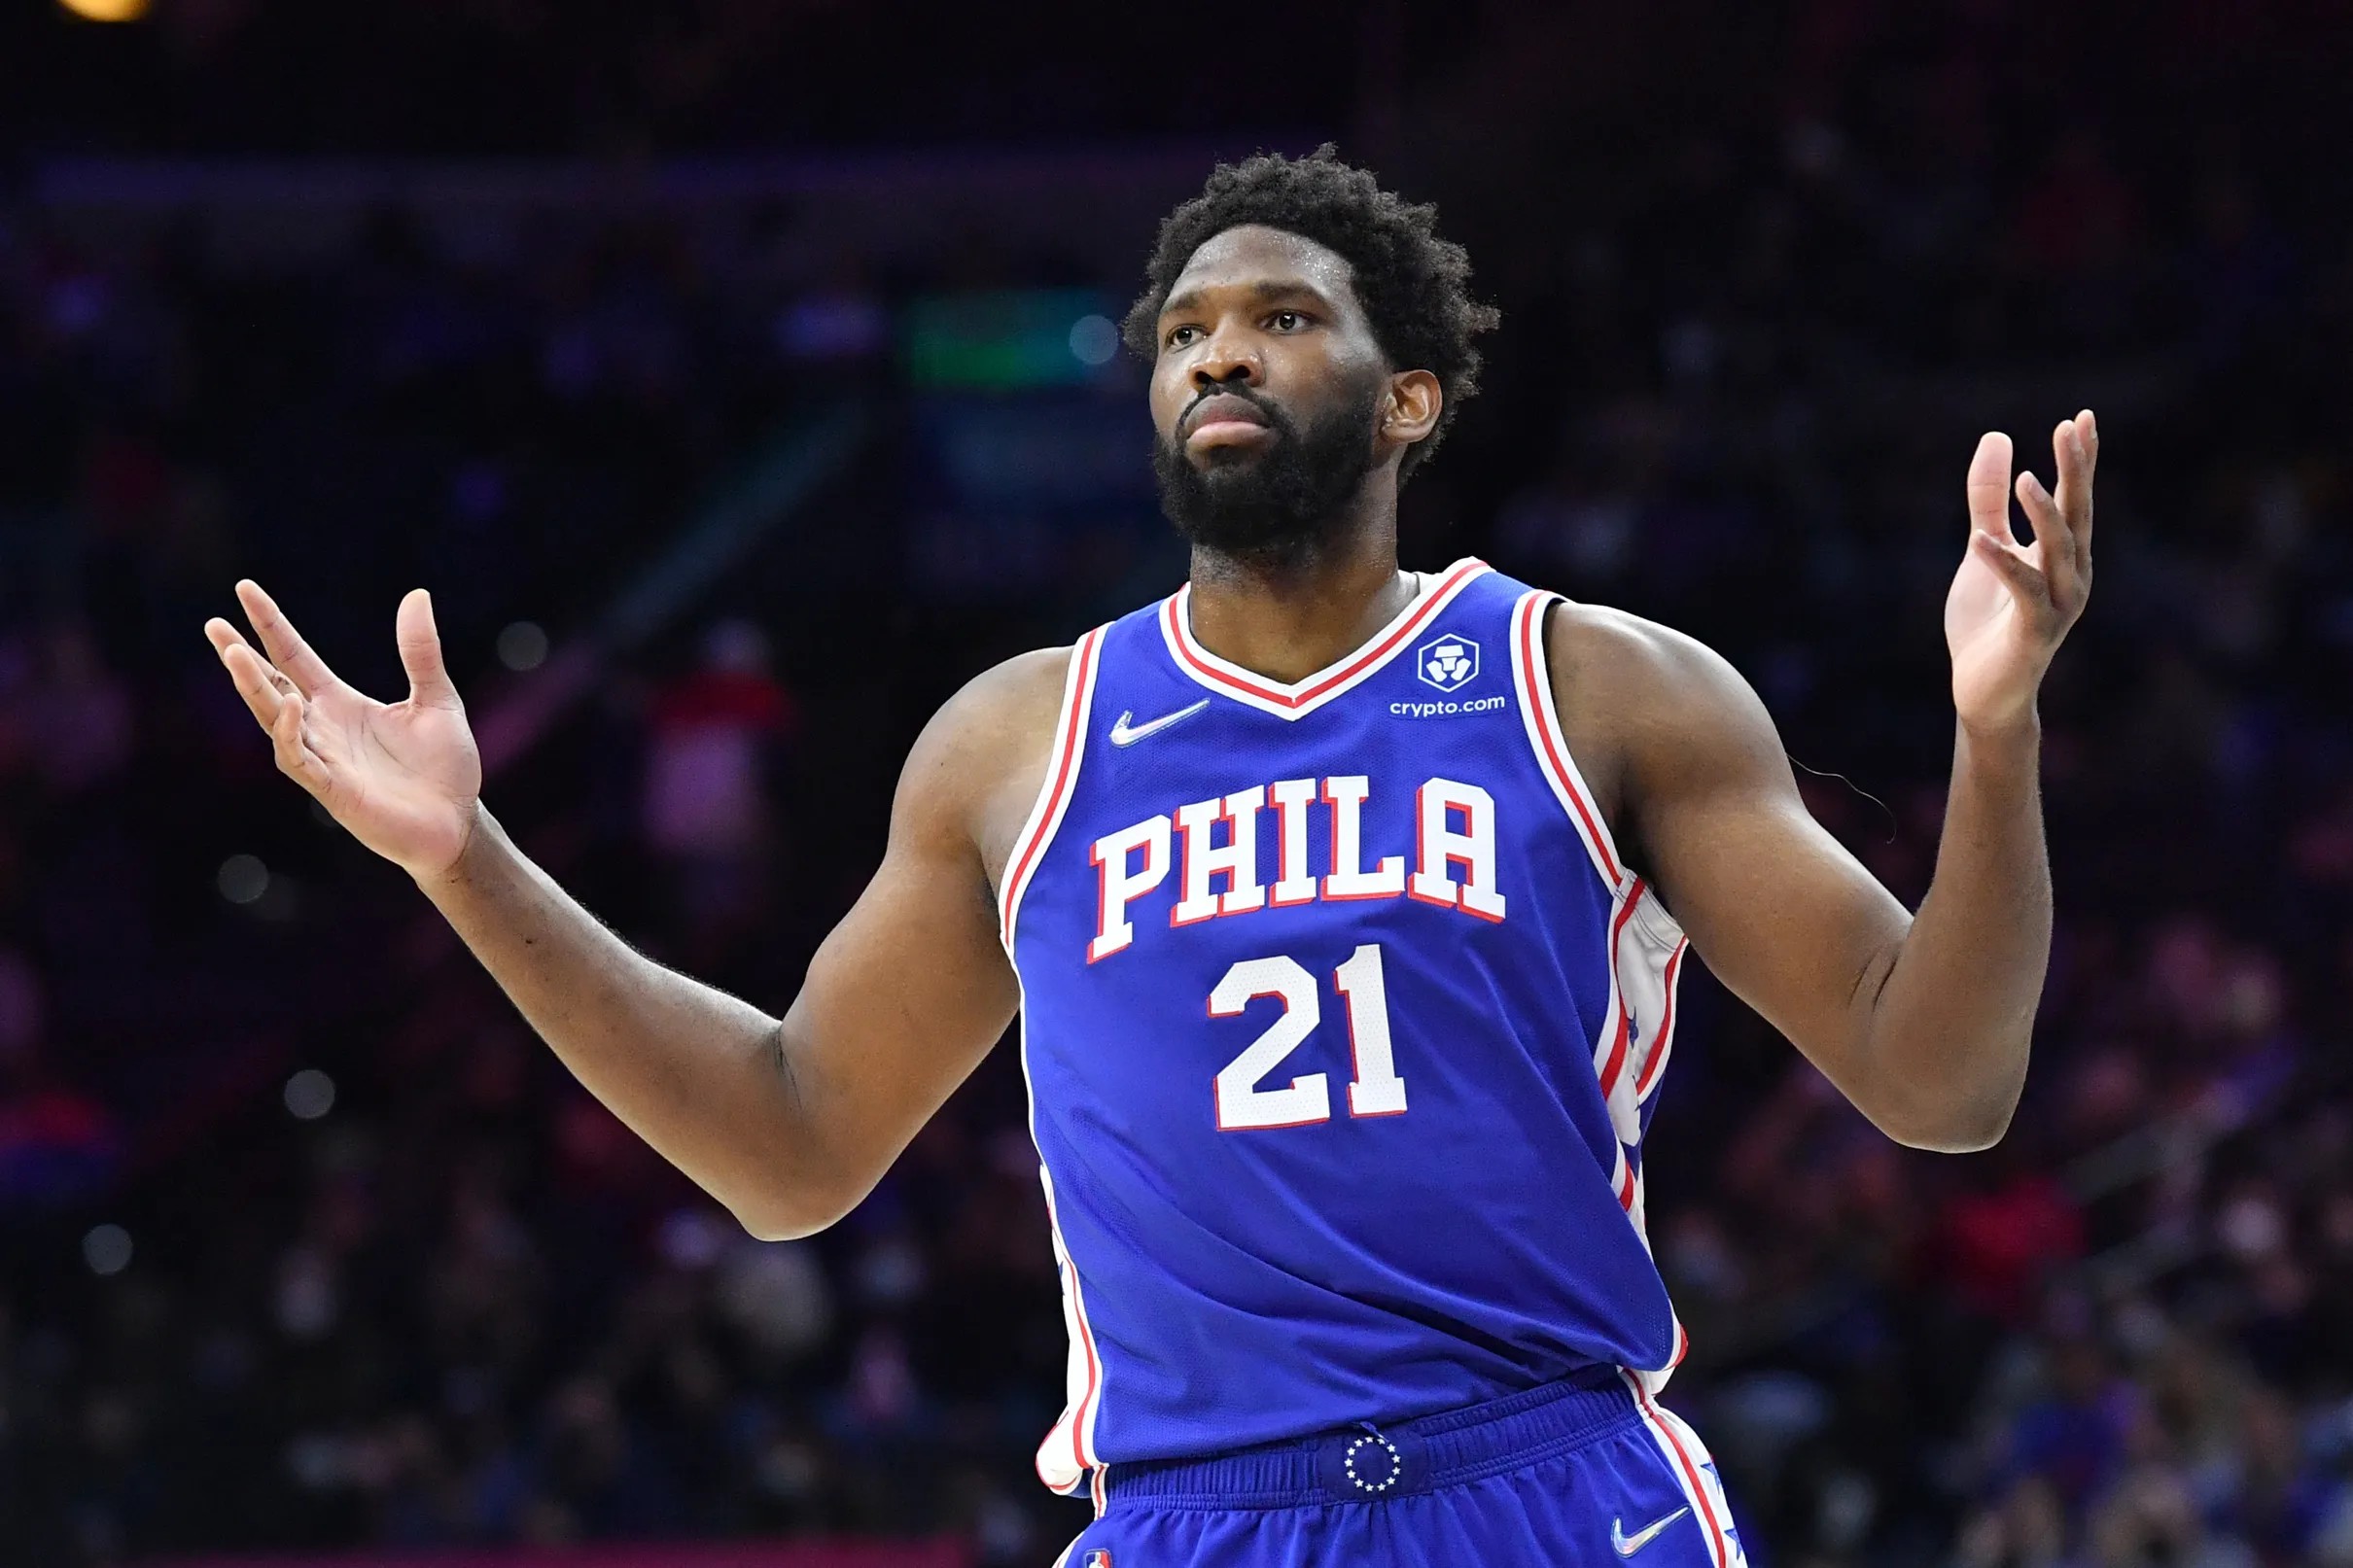 Joel Embiid looks to continue his incredible play as Lakers come to Philly